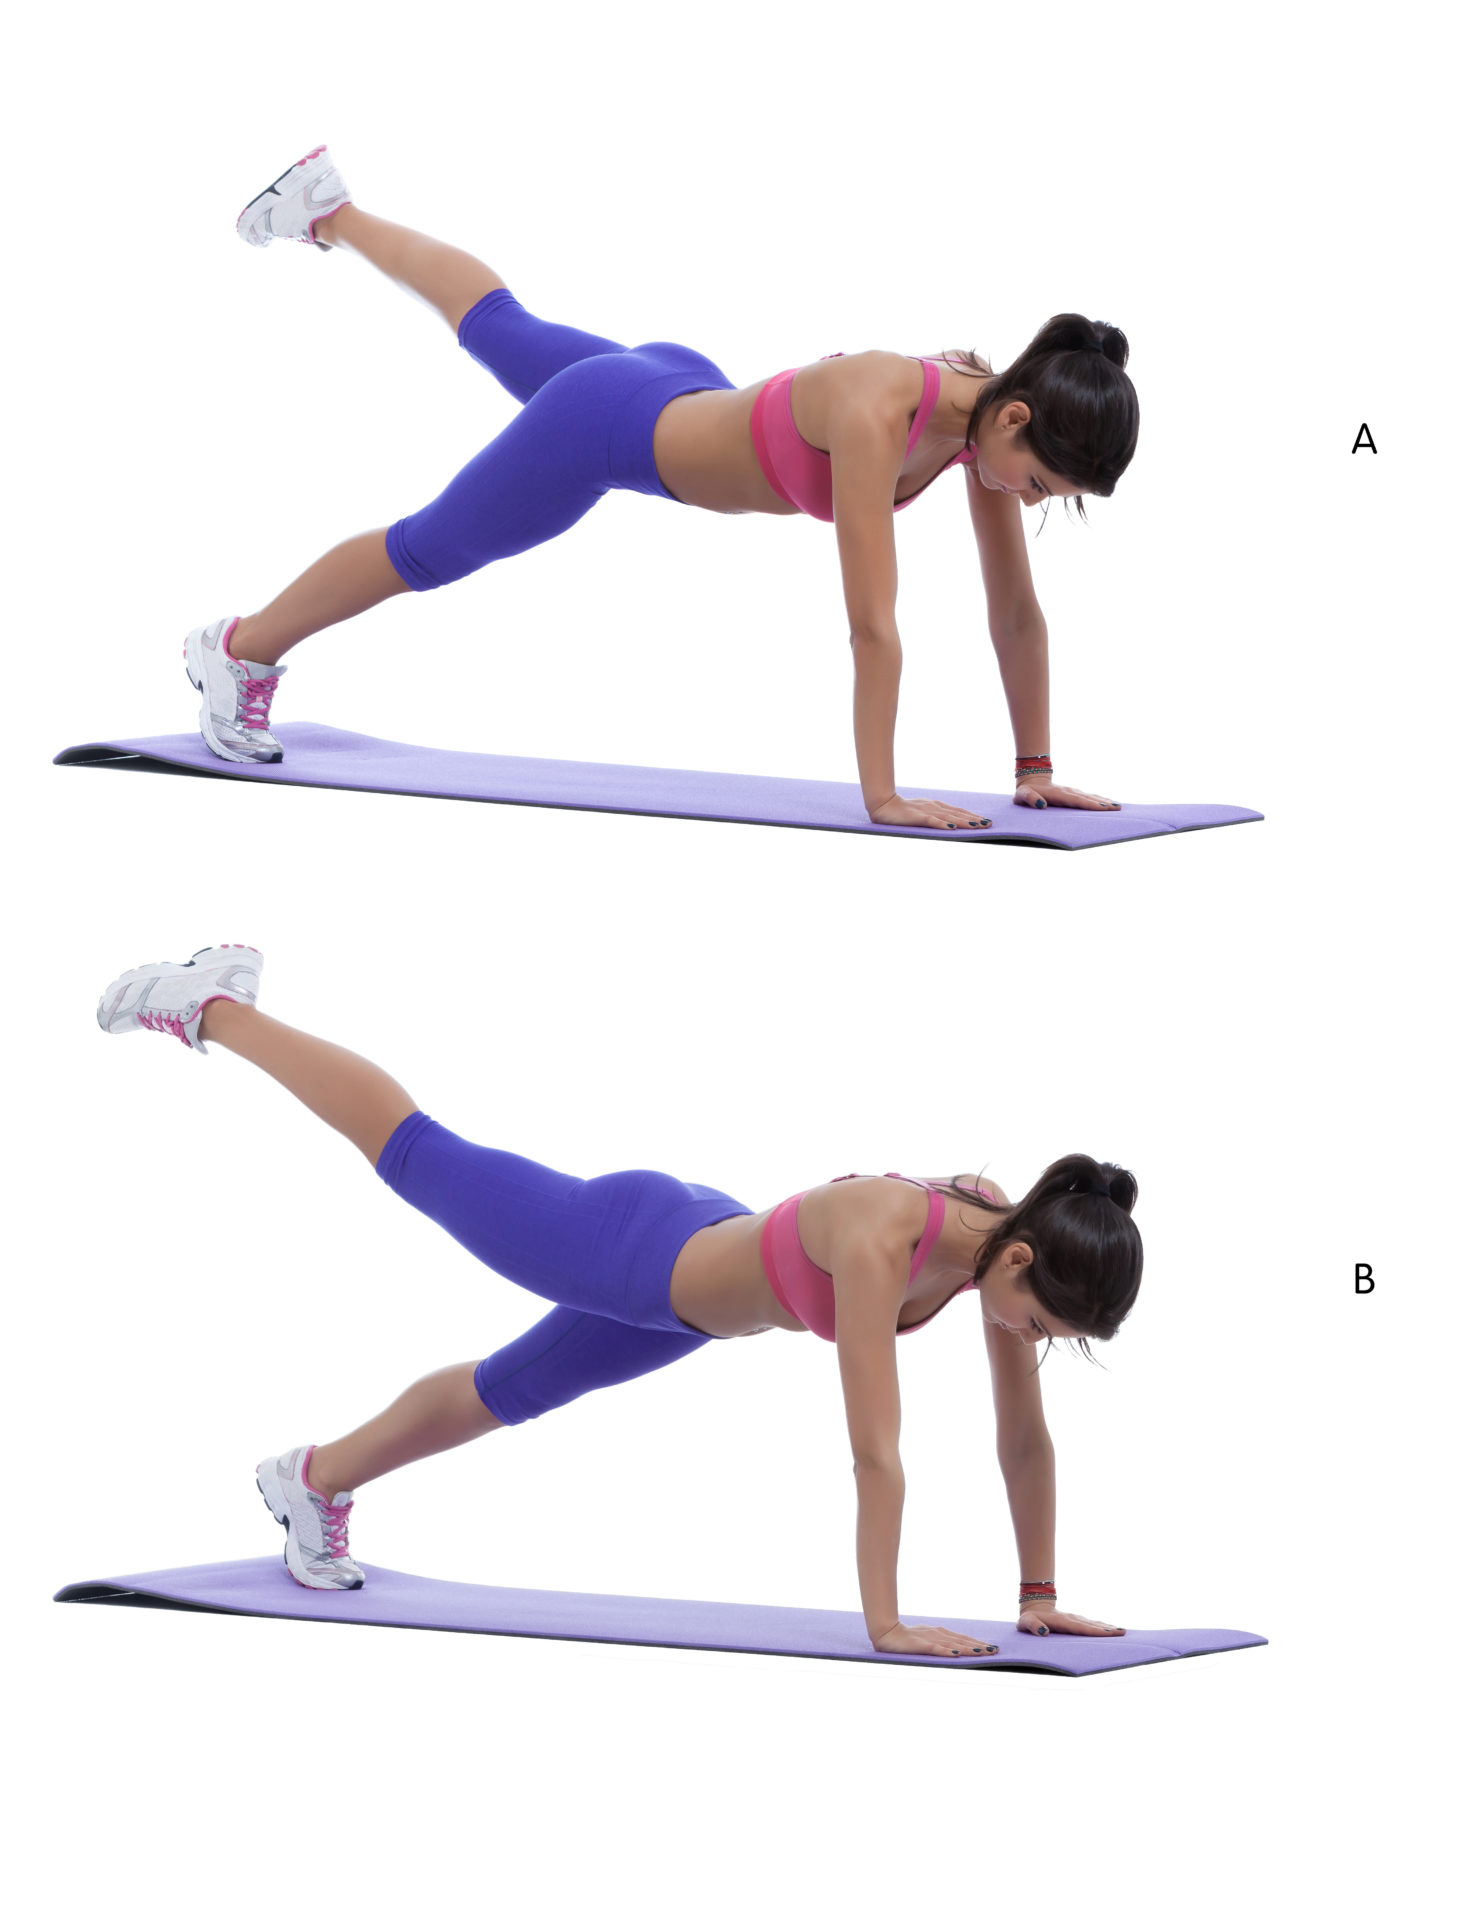 SportsMed Physical Therapy Lower Back Exercises - Plank w/ Leg Lift